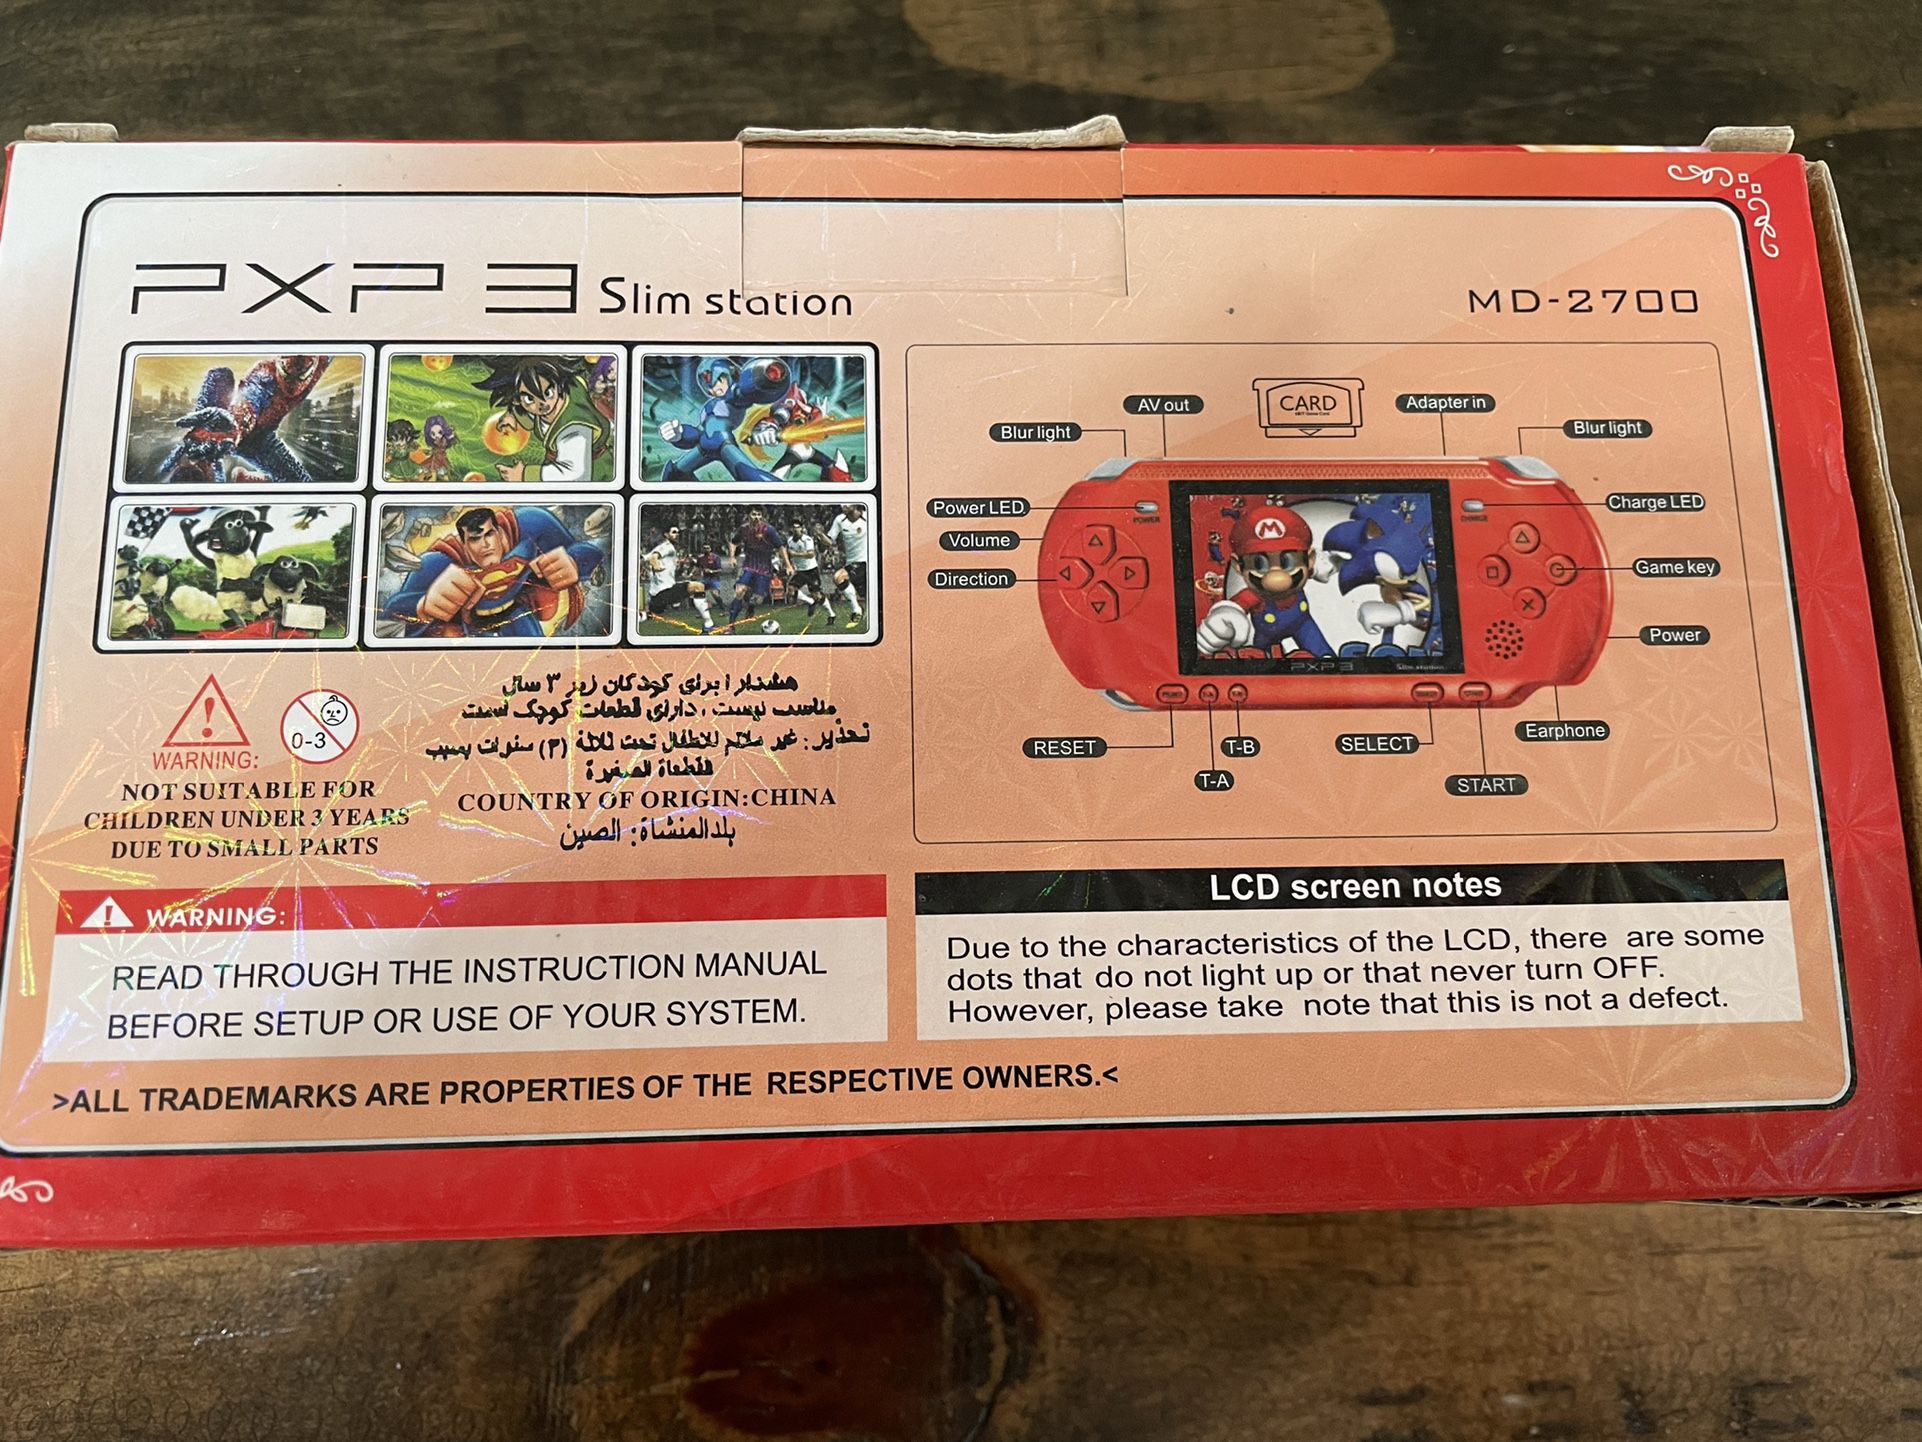 PXP 3 Slim Station Handheld Red Video Game System With Box And Two  Cartridge. for Sale in El Cajon, CA - OfferUp